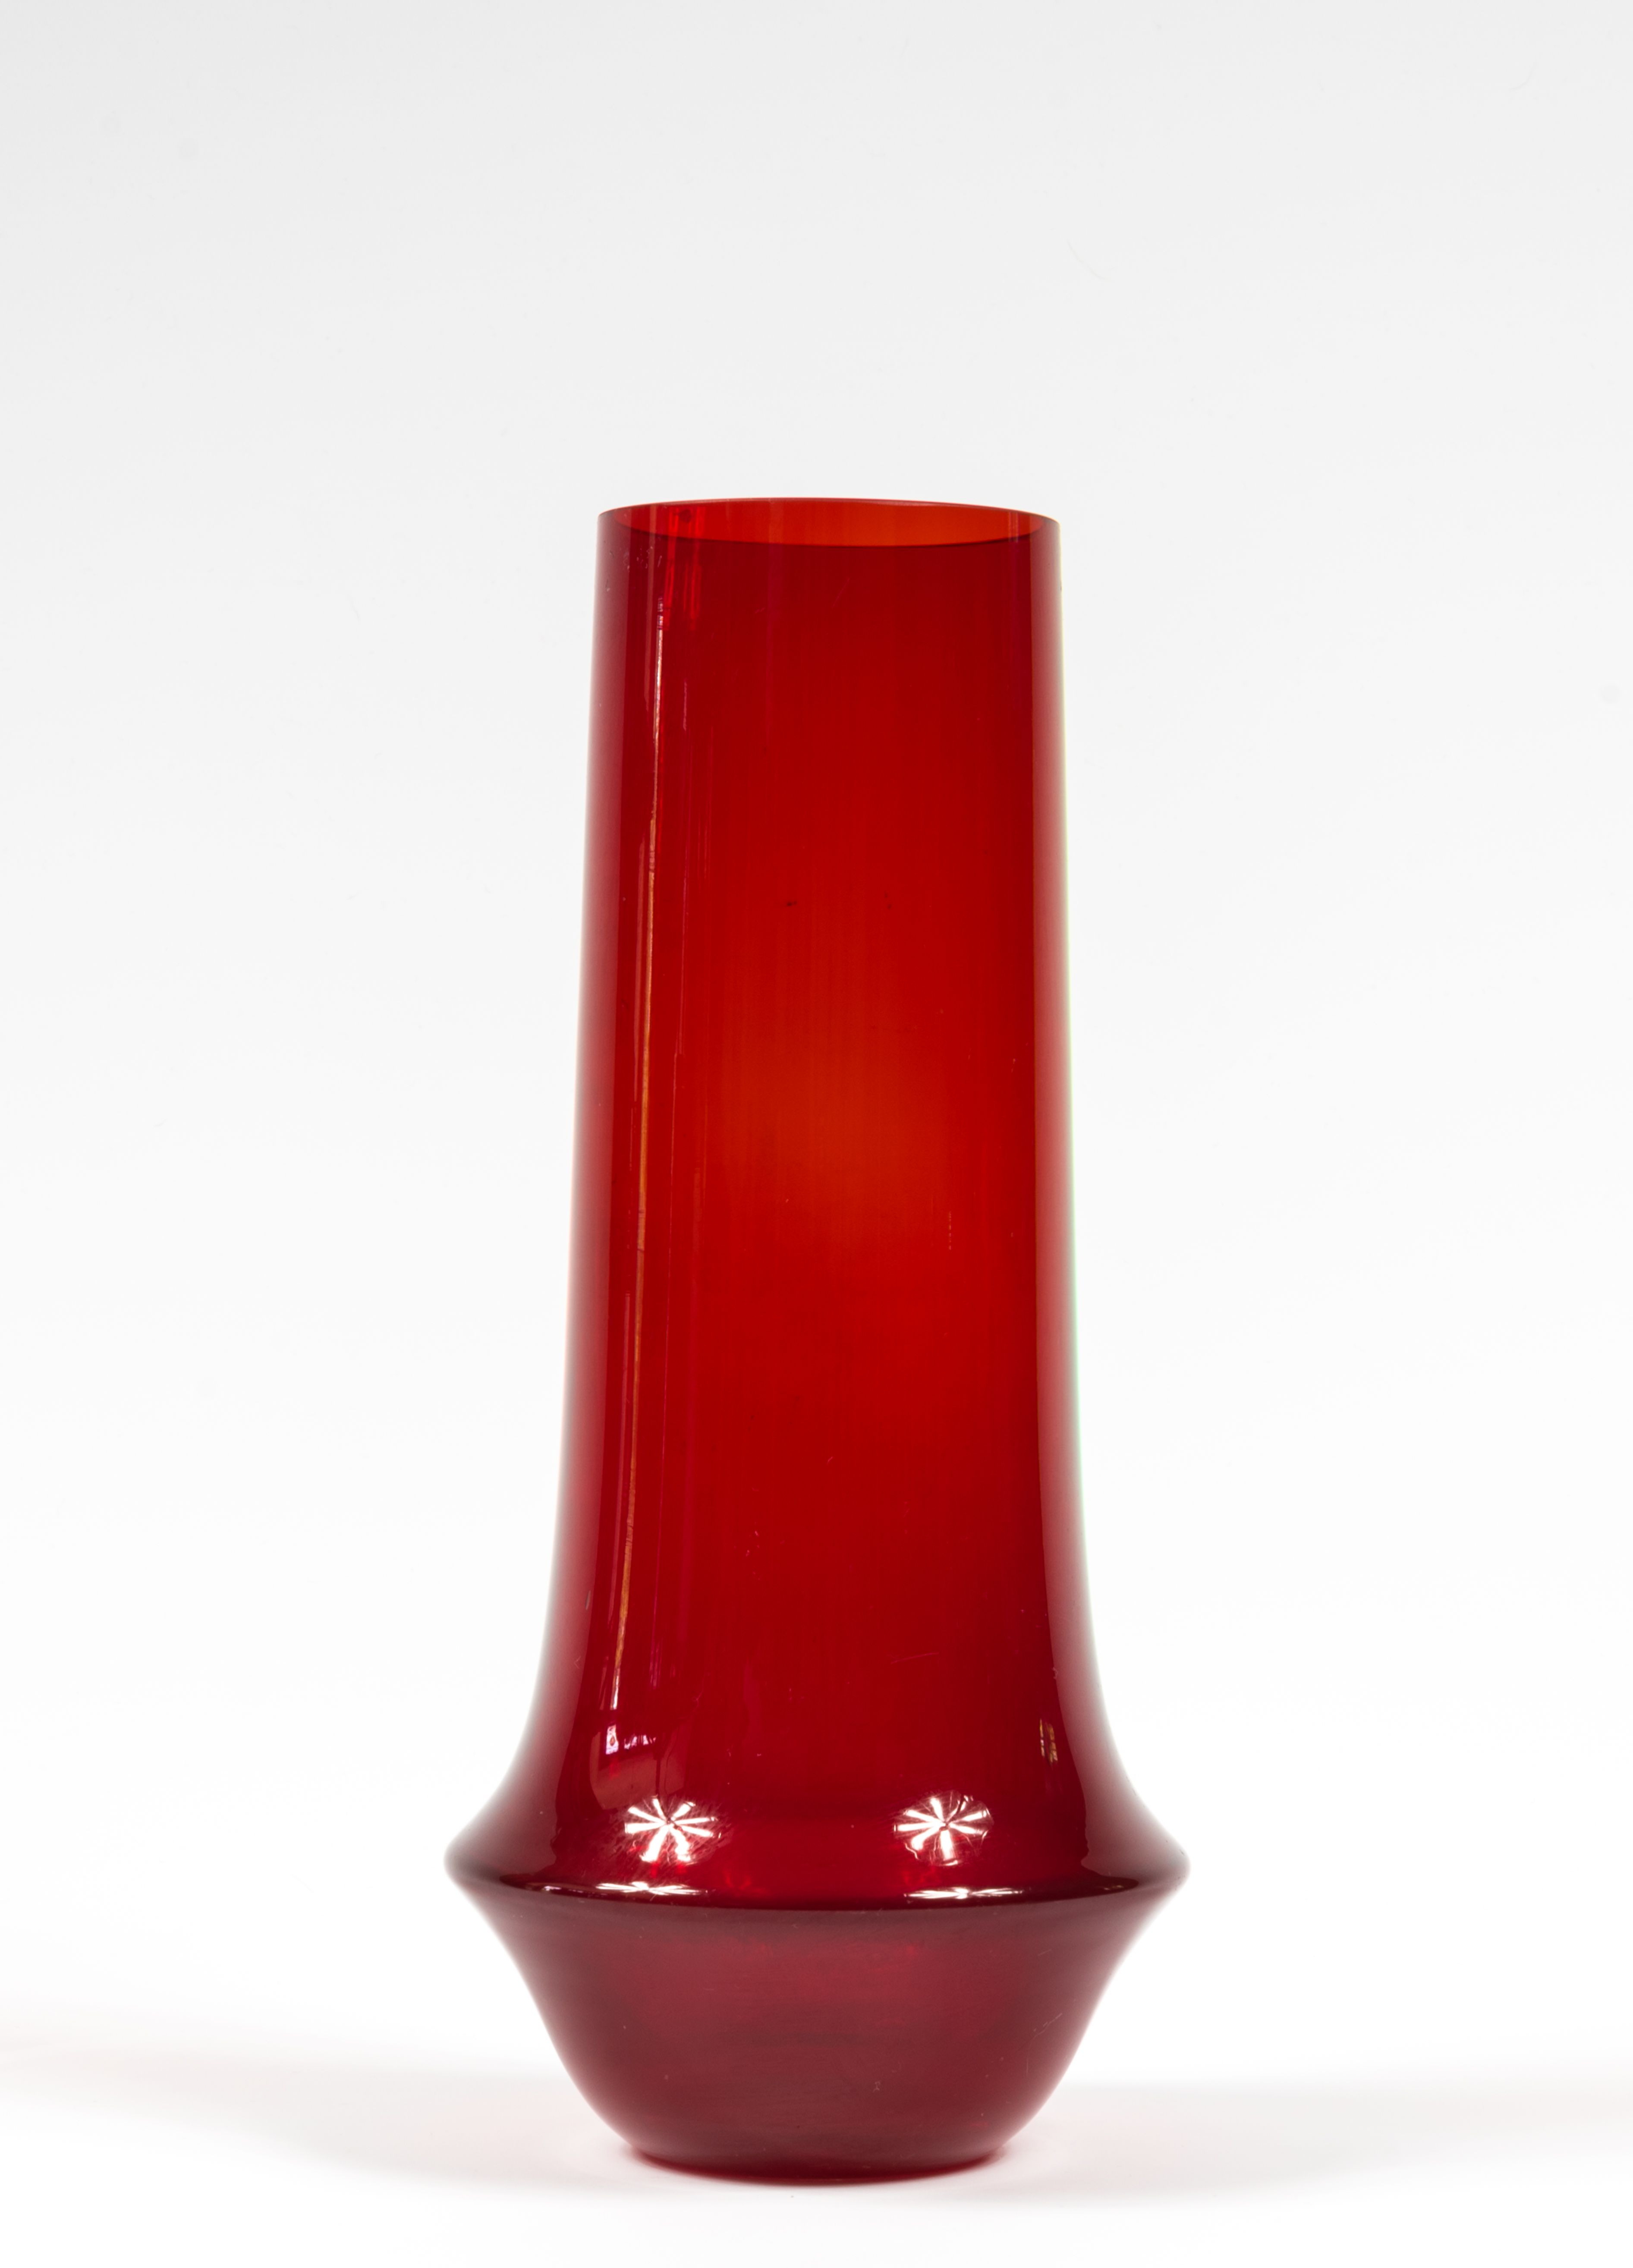 29 Recommended Red Glass Vases and Bowls 2022 free download red glass vases and bowls of riihimac2a4en lasi oy riihimaki red glass vase by tamara aladin in large scandinavian red glass vase designed by tamara aladin c1963 for riihimaki riihimaen lasi